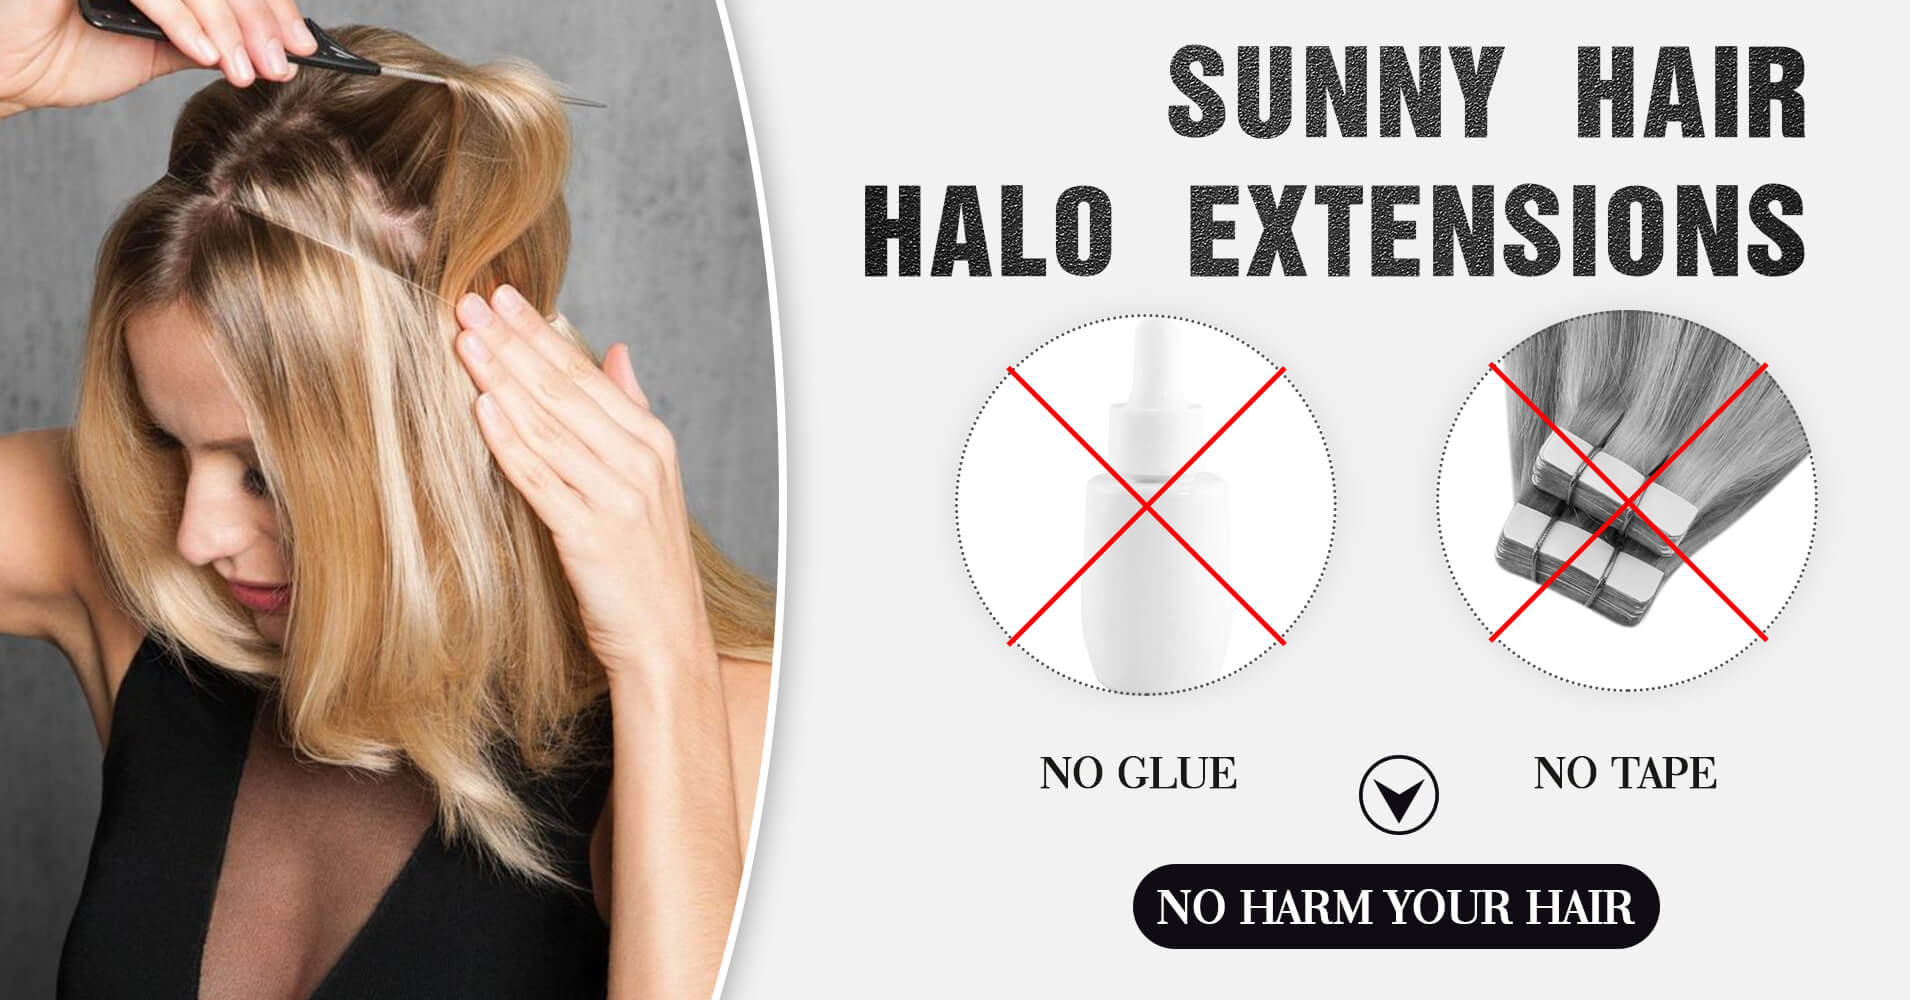 Sunny hair，halo hair extensions,no glue,no tape,best halo hair extensions